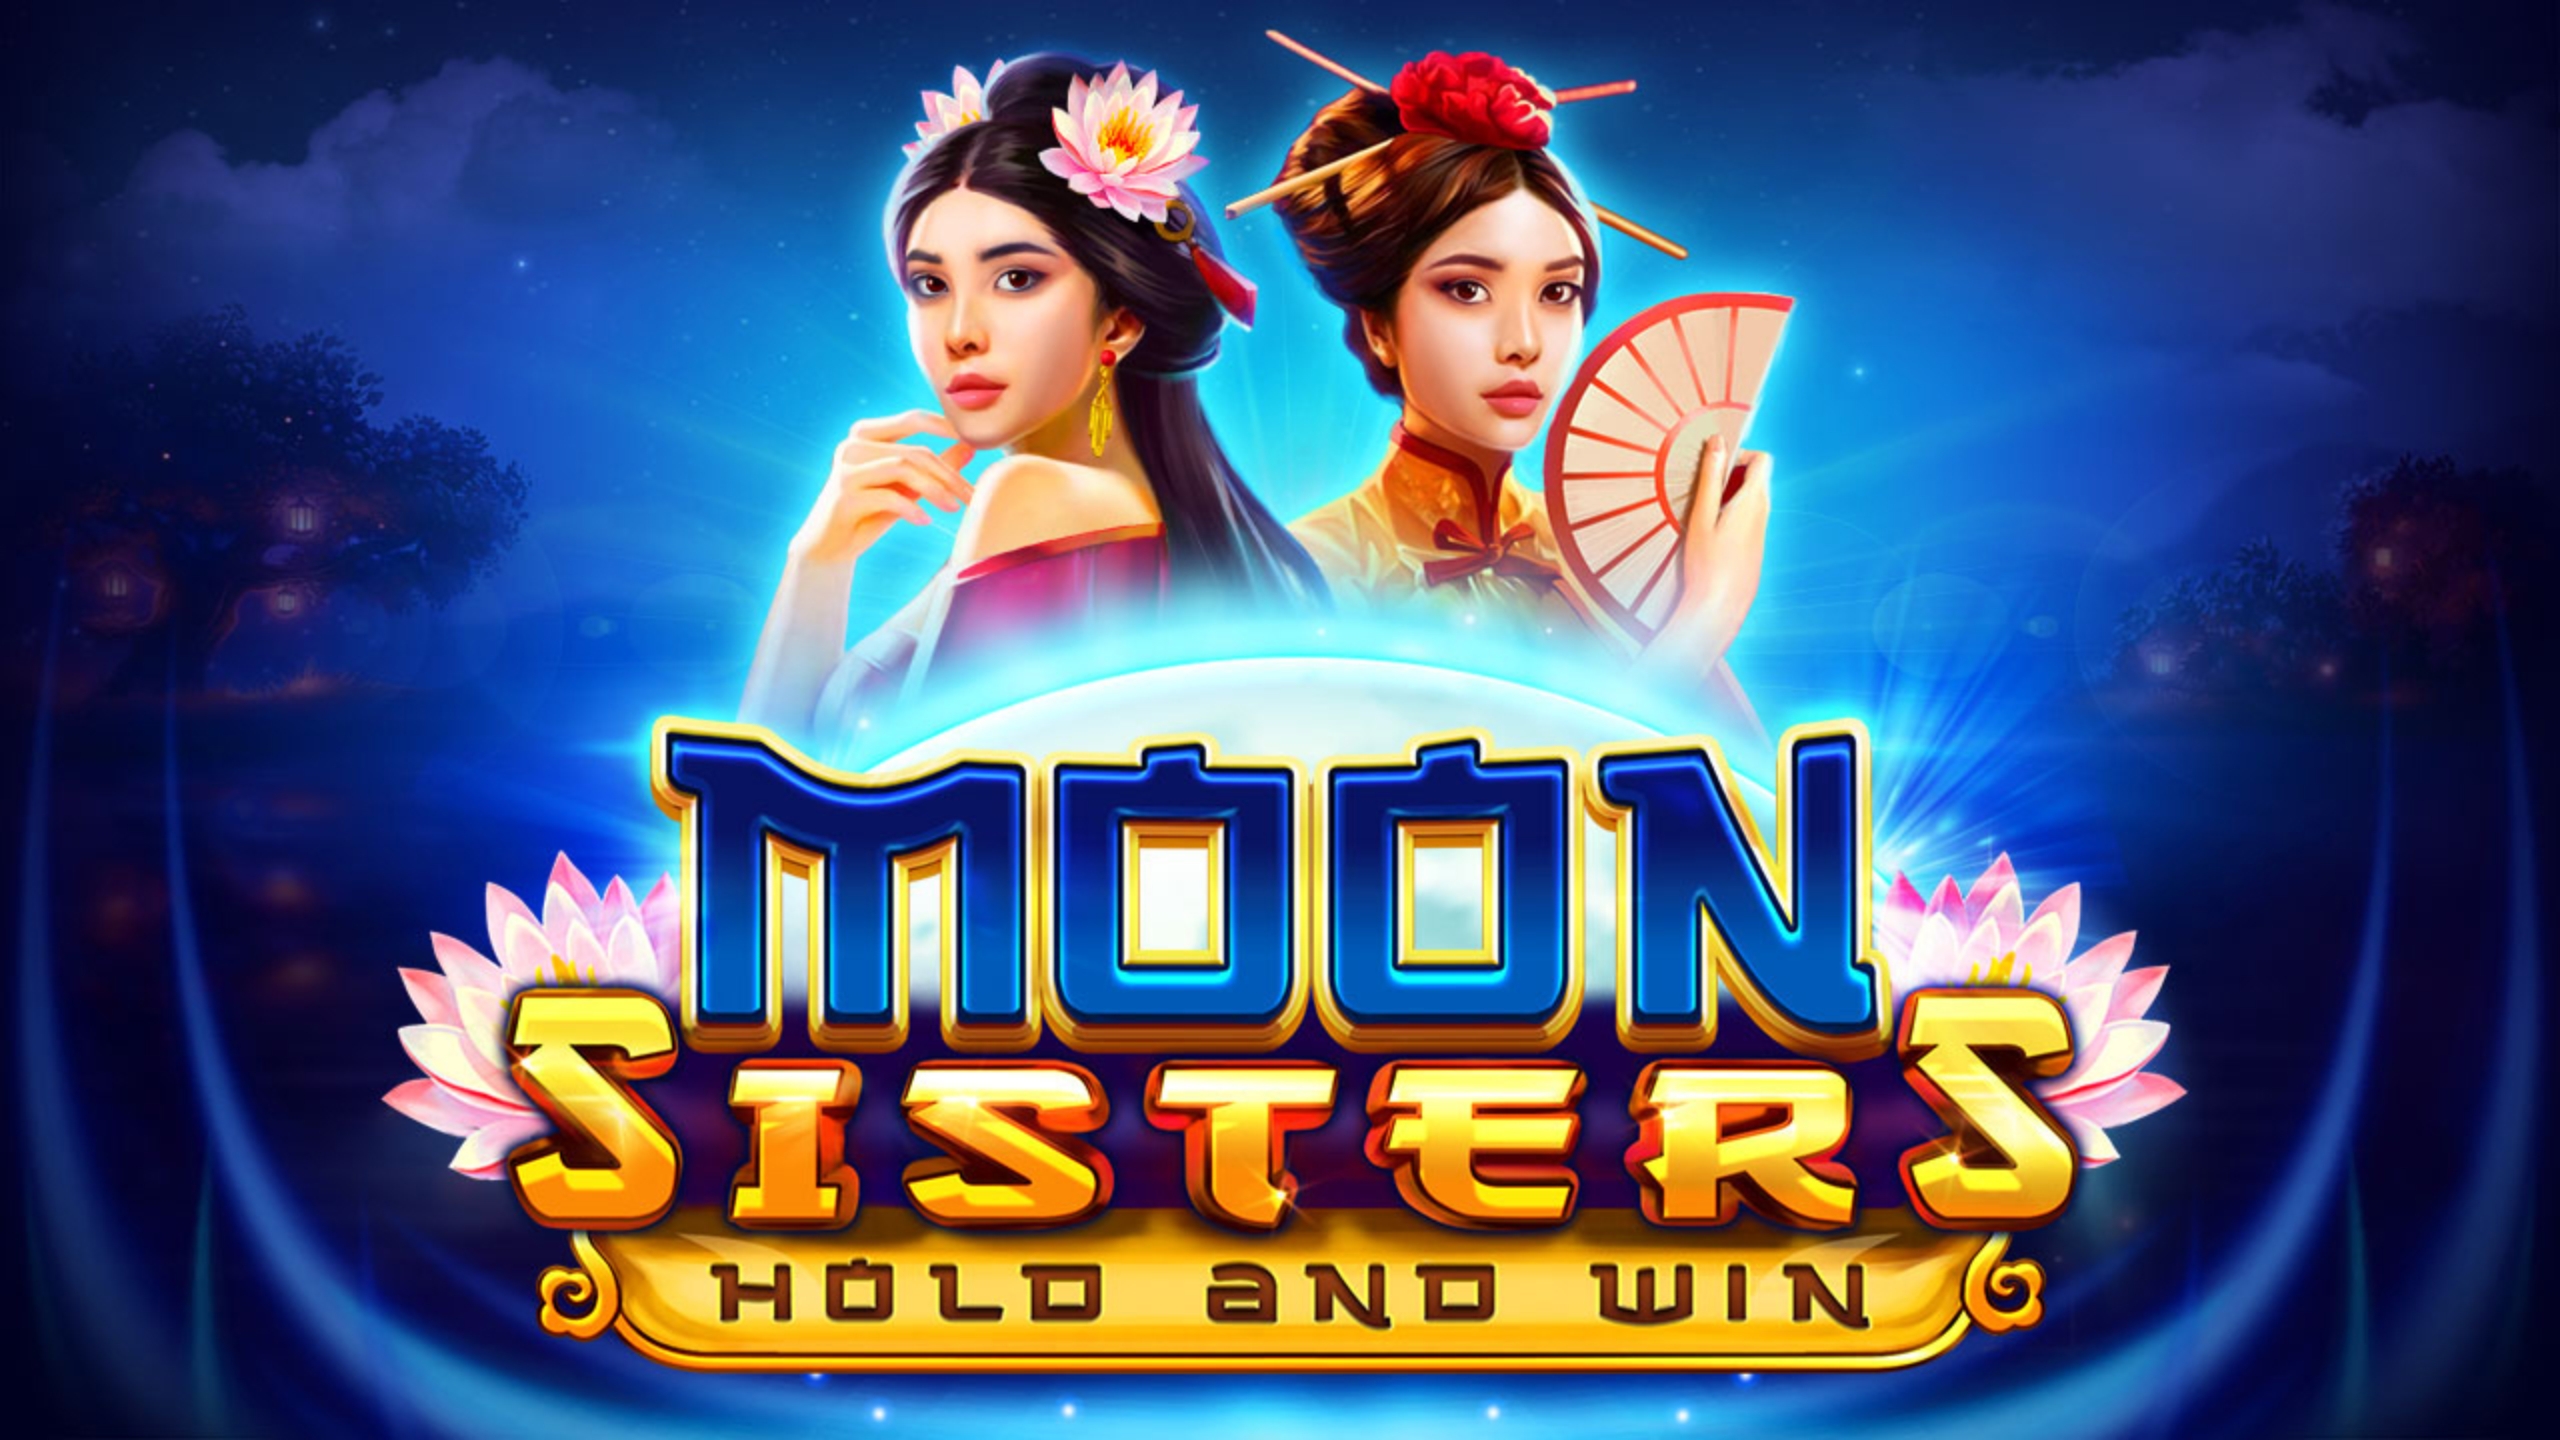 The Moon Sisters Online Slot Demo Game by Booongo Gaming